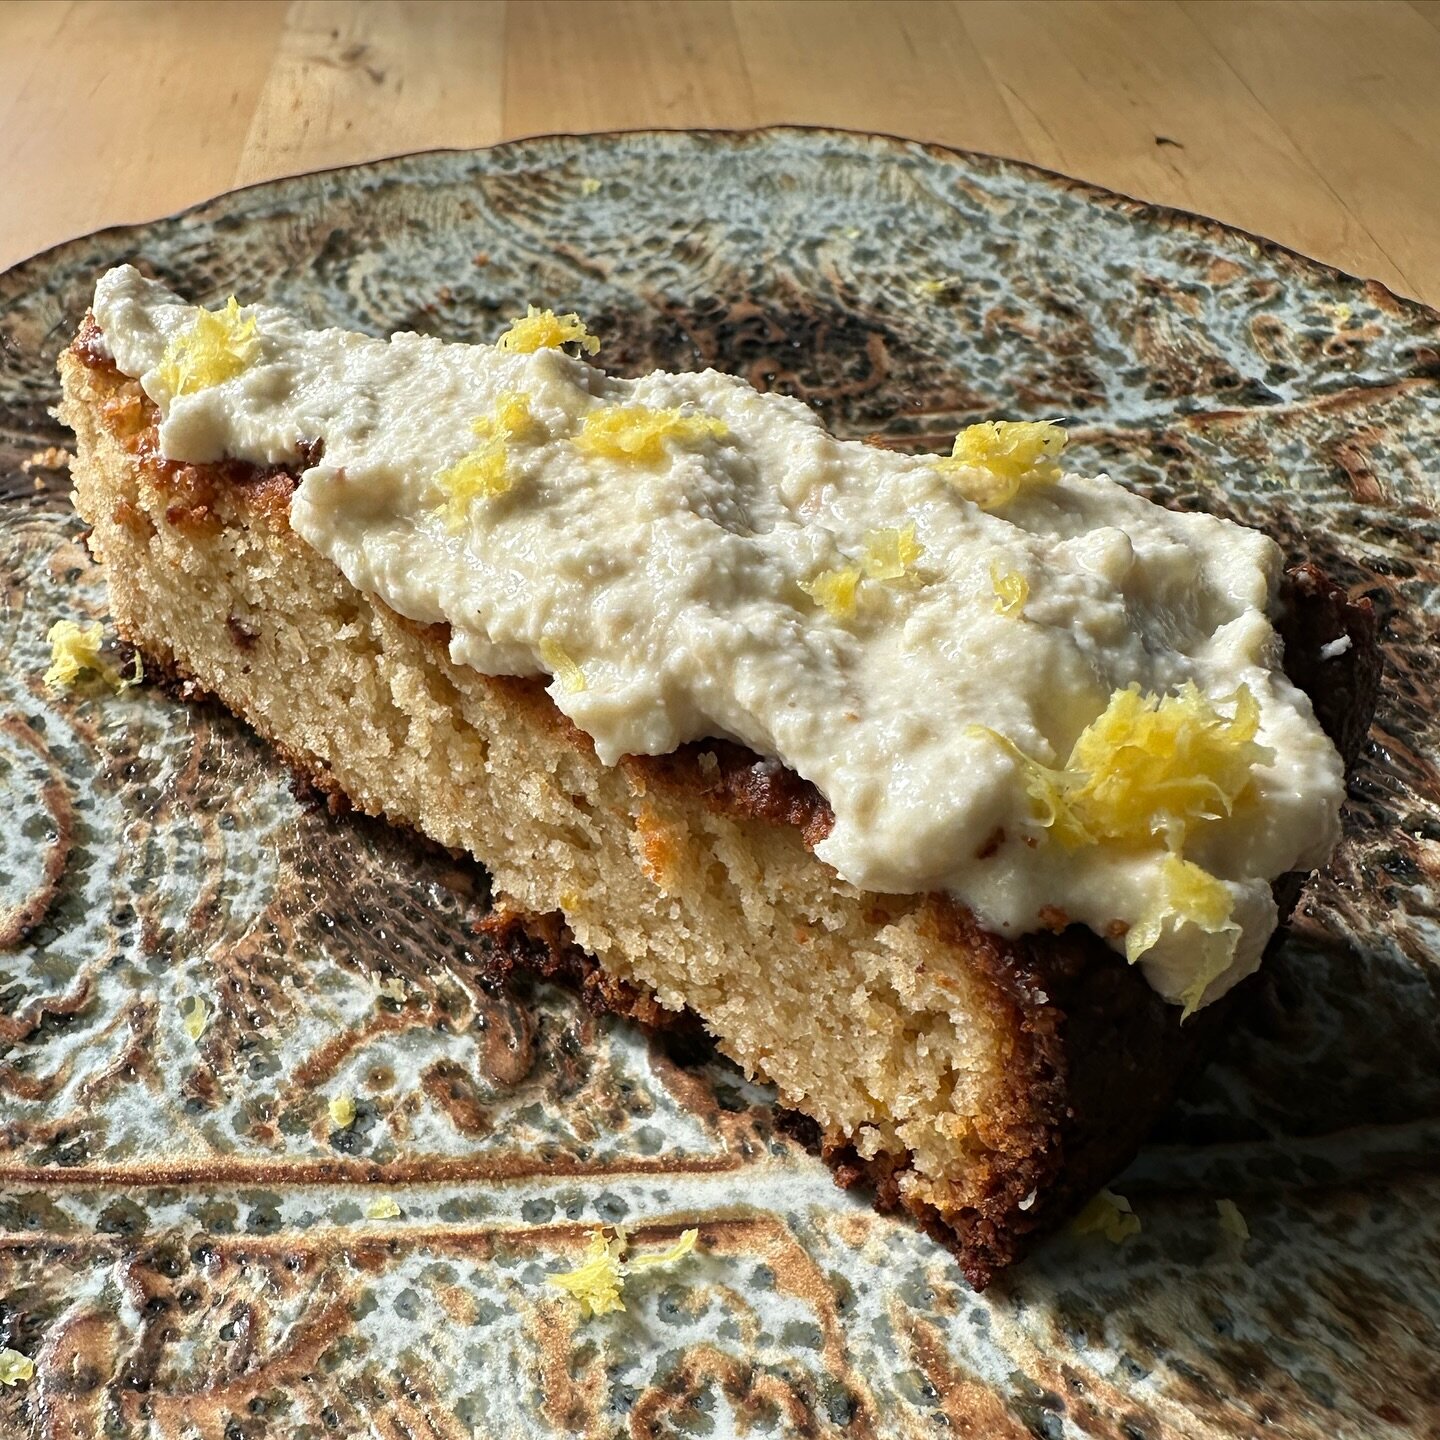 Still perfecting this almond cake recipe with a creamy lemon marzipan fluff on top ~ one of these days! Anyone want to be a taster? Mind you the recipe is meant to be on the healthy and low glycemic side of deserts! 

#highvibrations